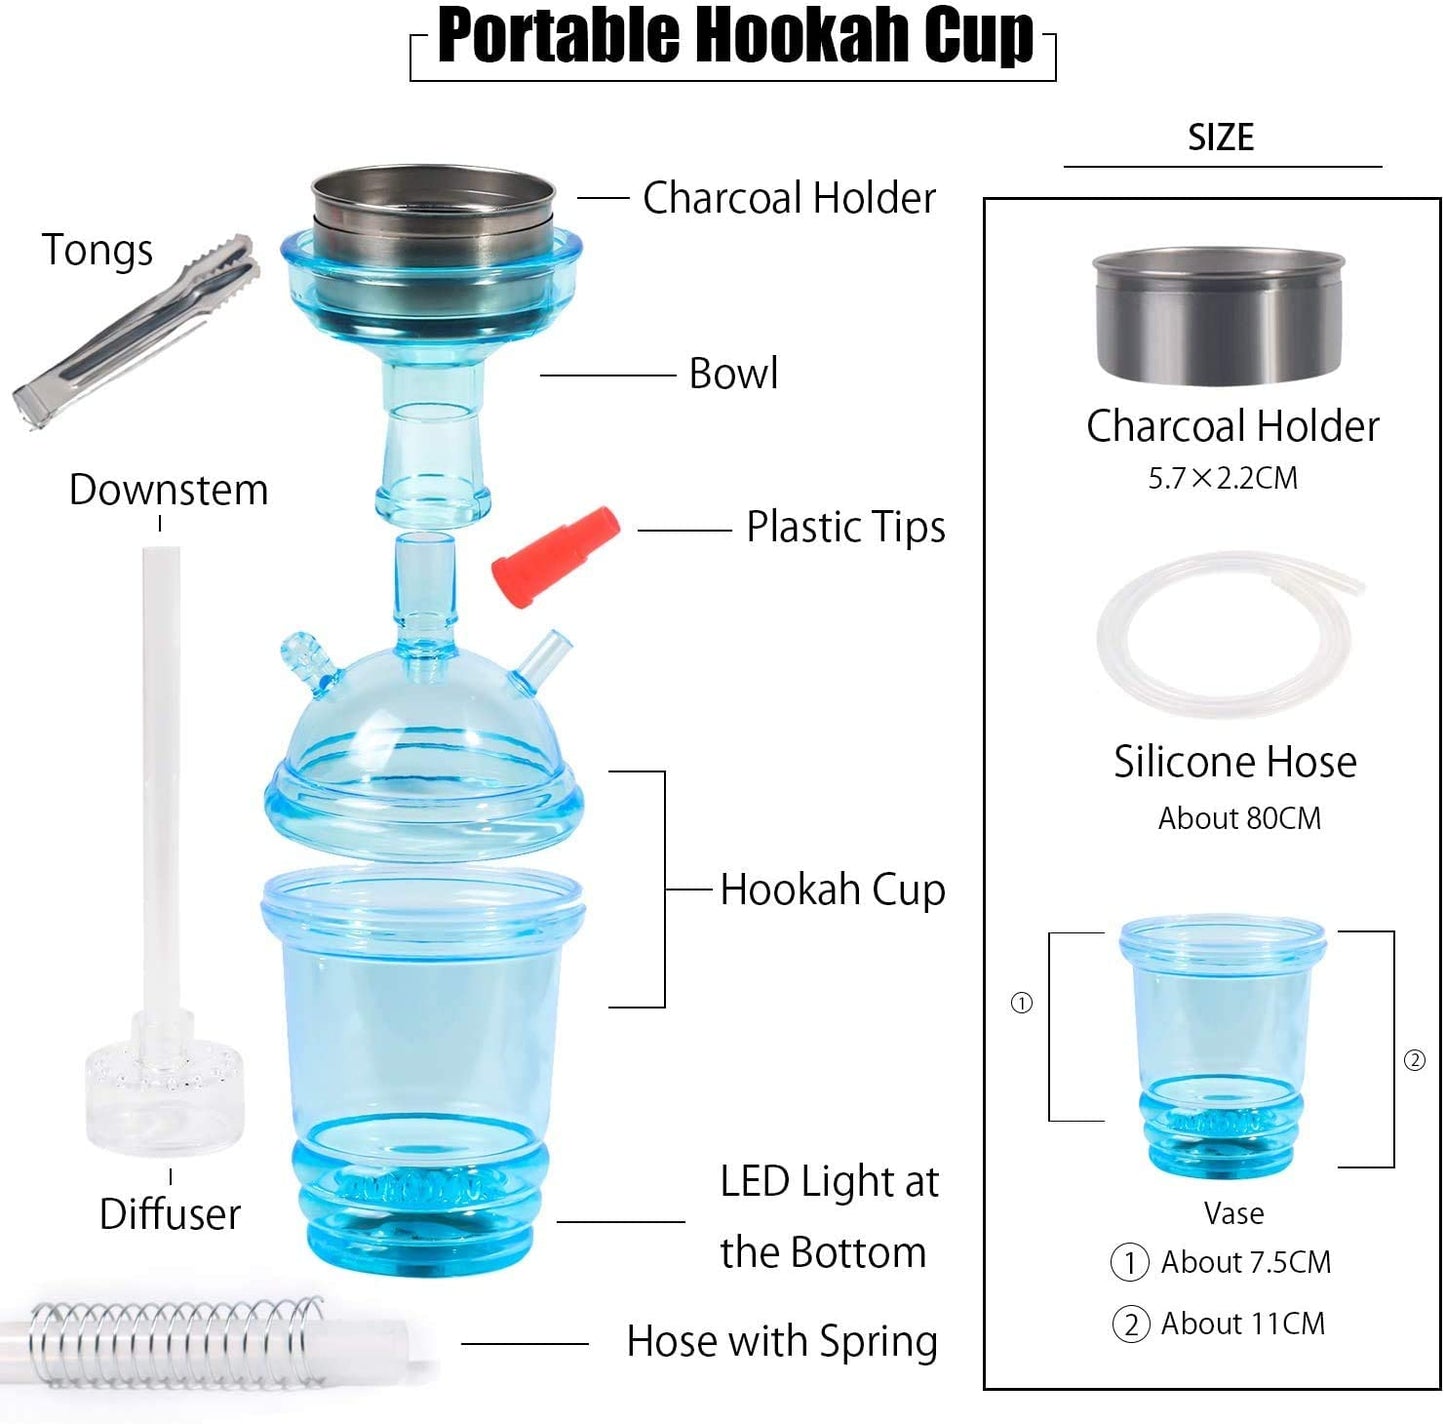 Dream Hookah Cup with LED light